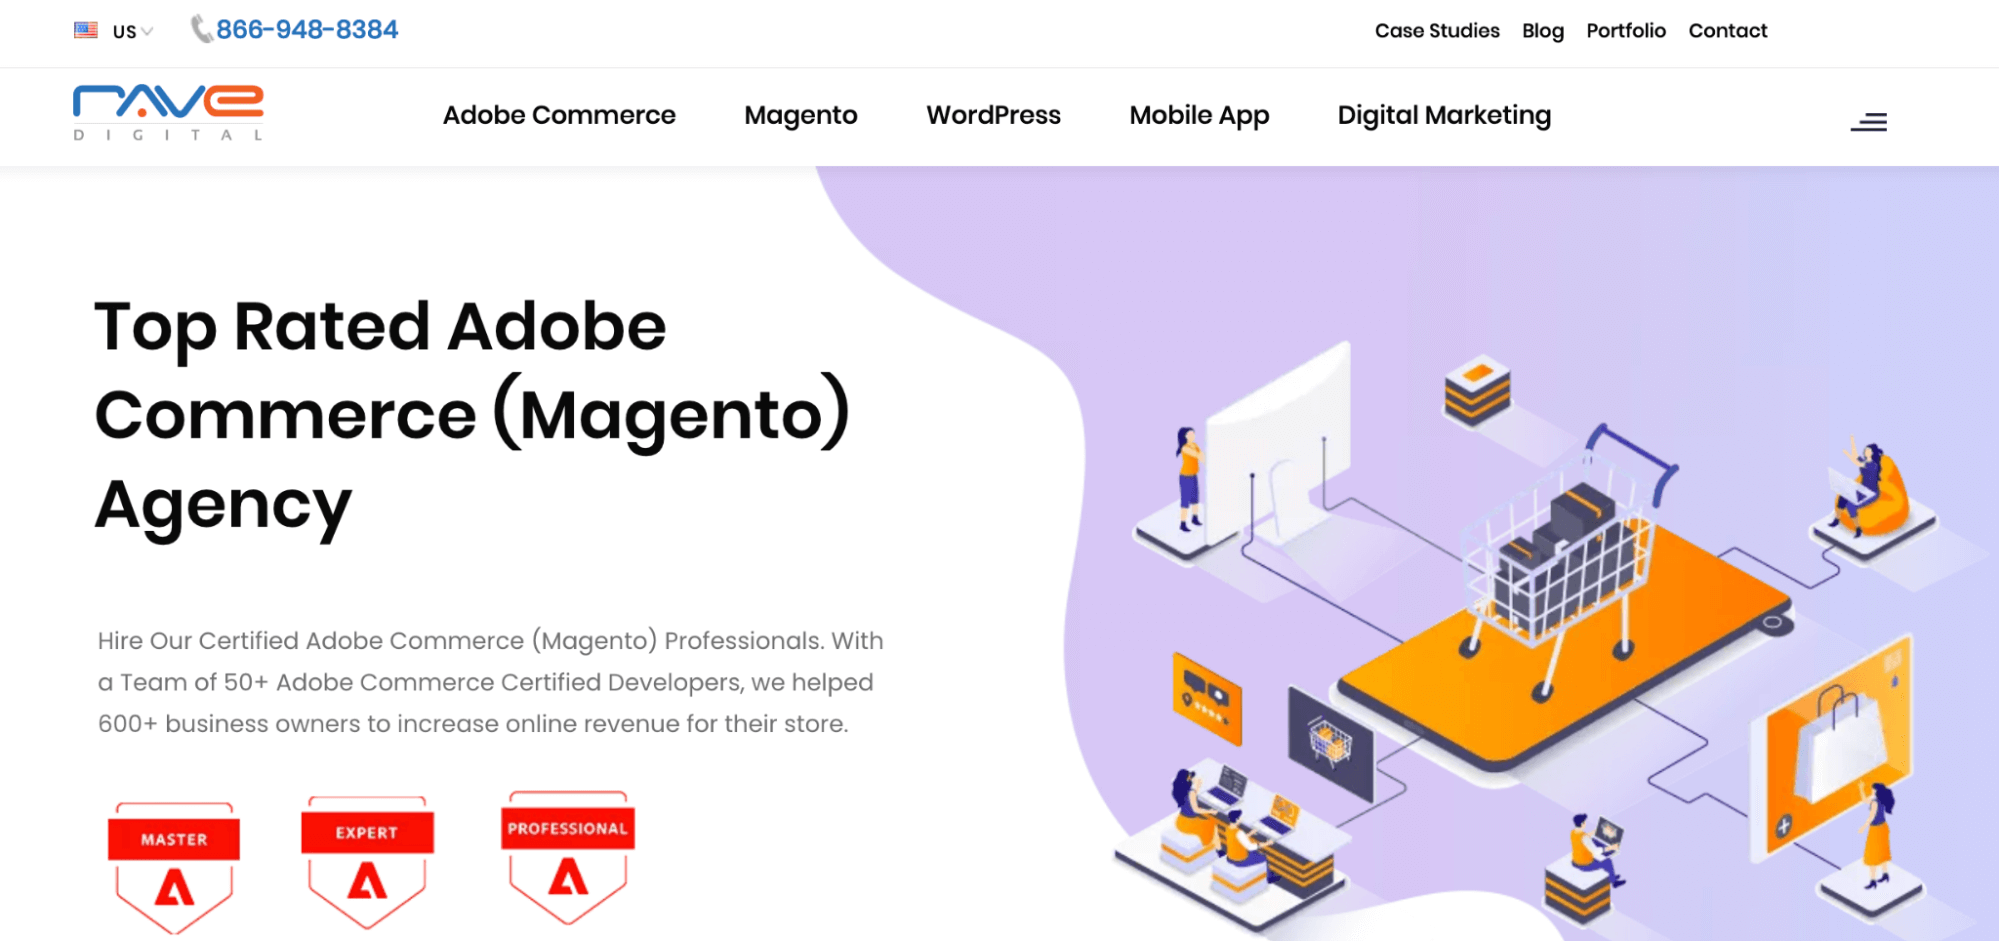 Rave Digital homepage: Top rated adobe commerce (Magento) agency